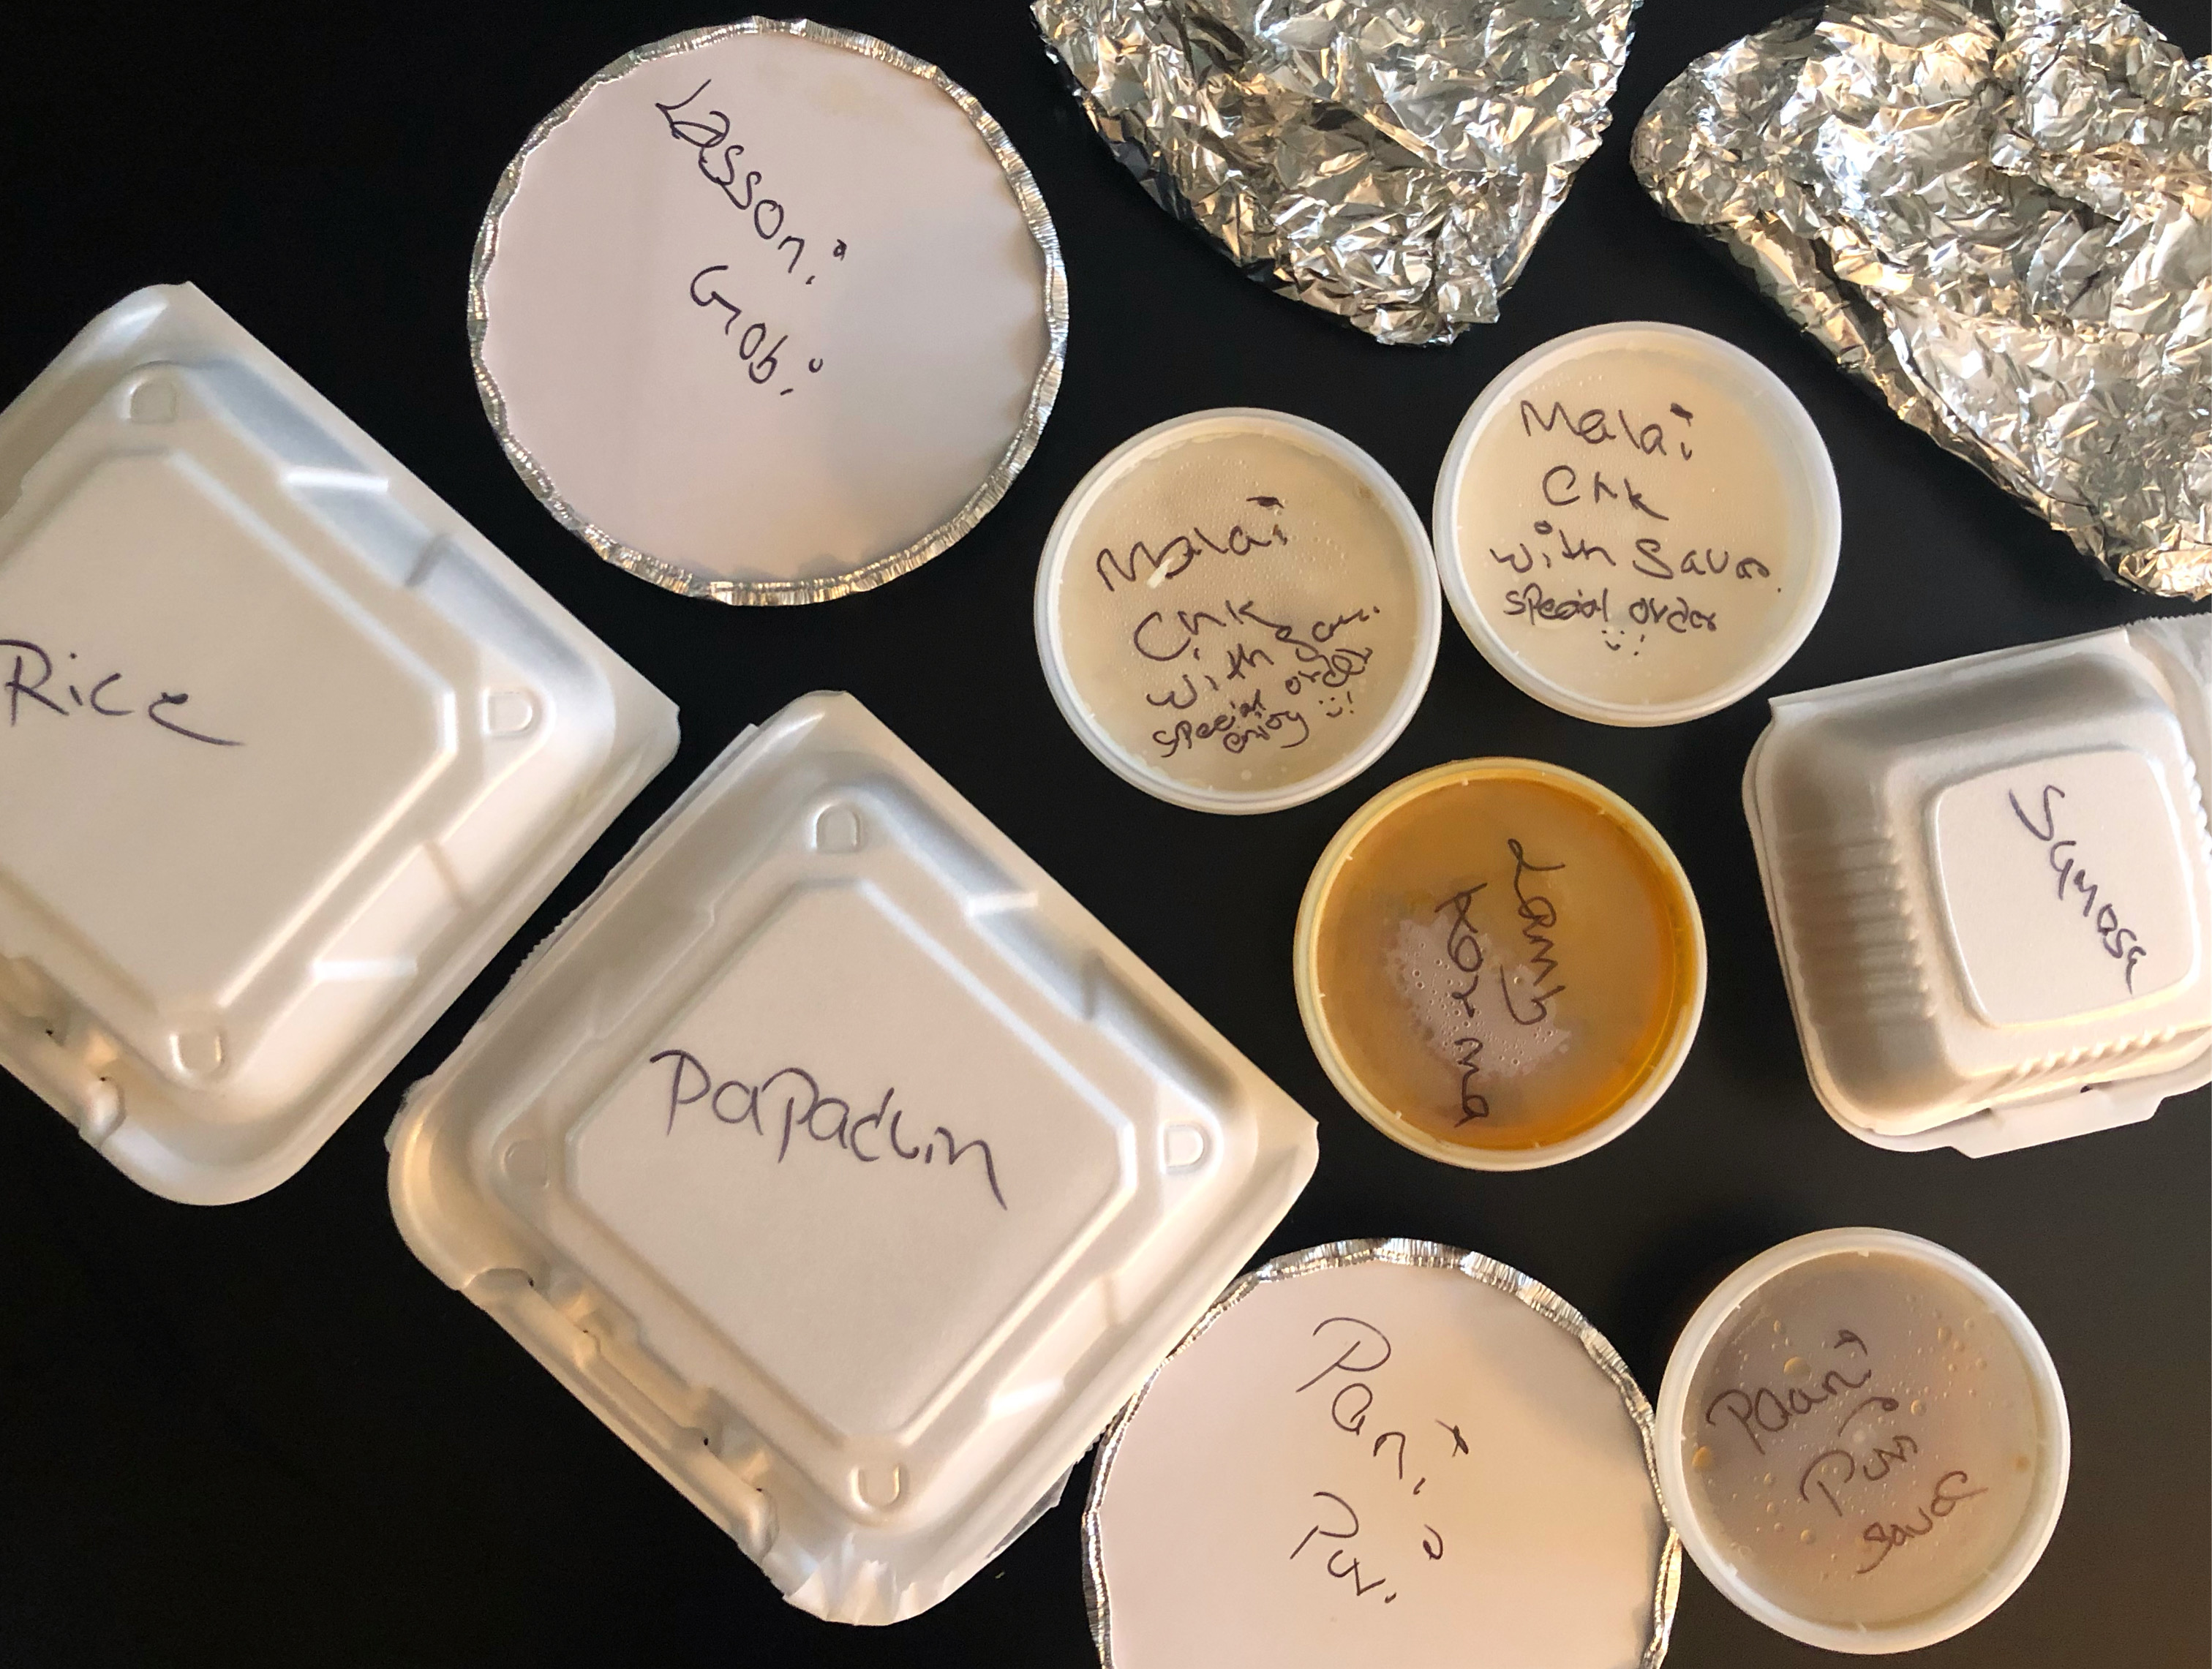 A collection of takeout containers from Himalayan Chimney are scrawled in black ink the names of the dishes on a black table. Photo by Alyssa Buckley.